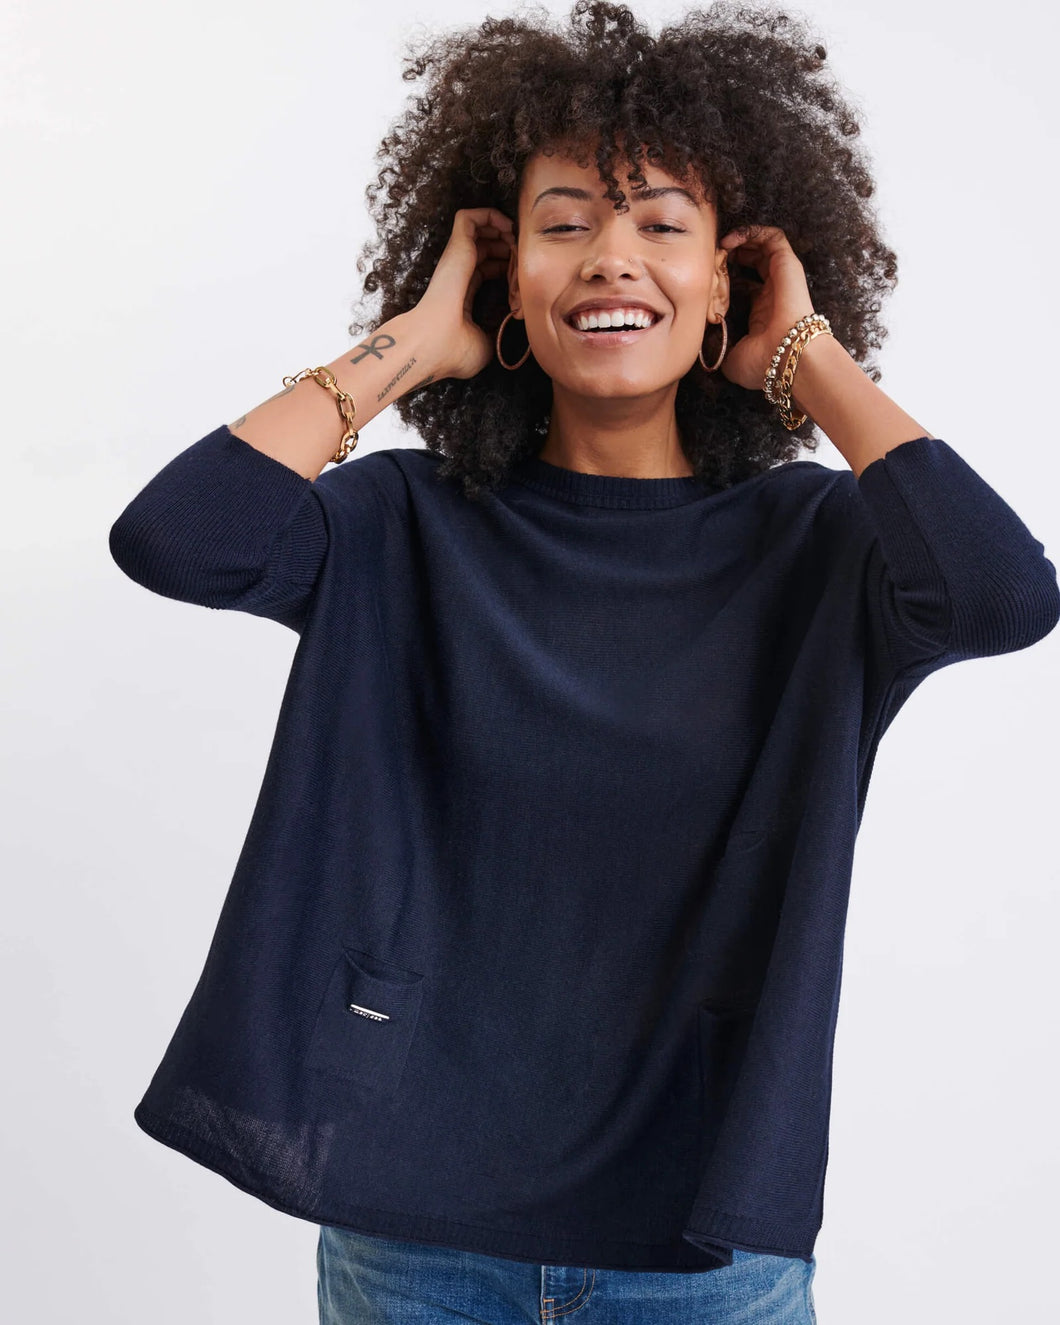 Catalina one Size Cotton Crewneck Sweater in Navy by Mersea